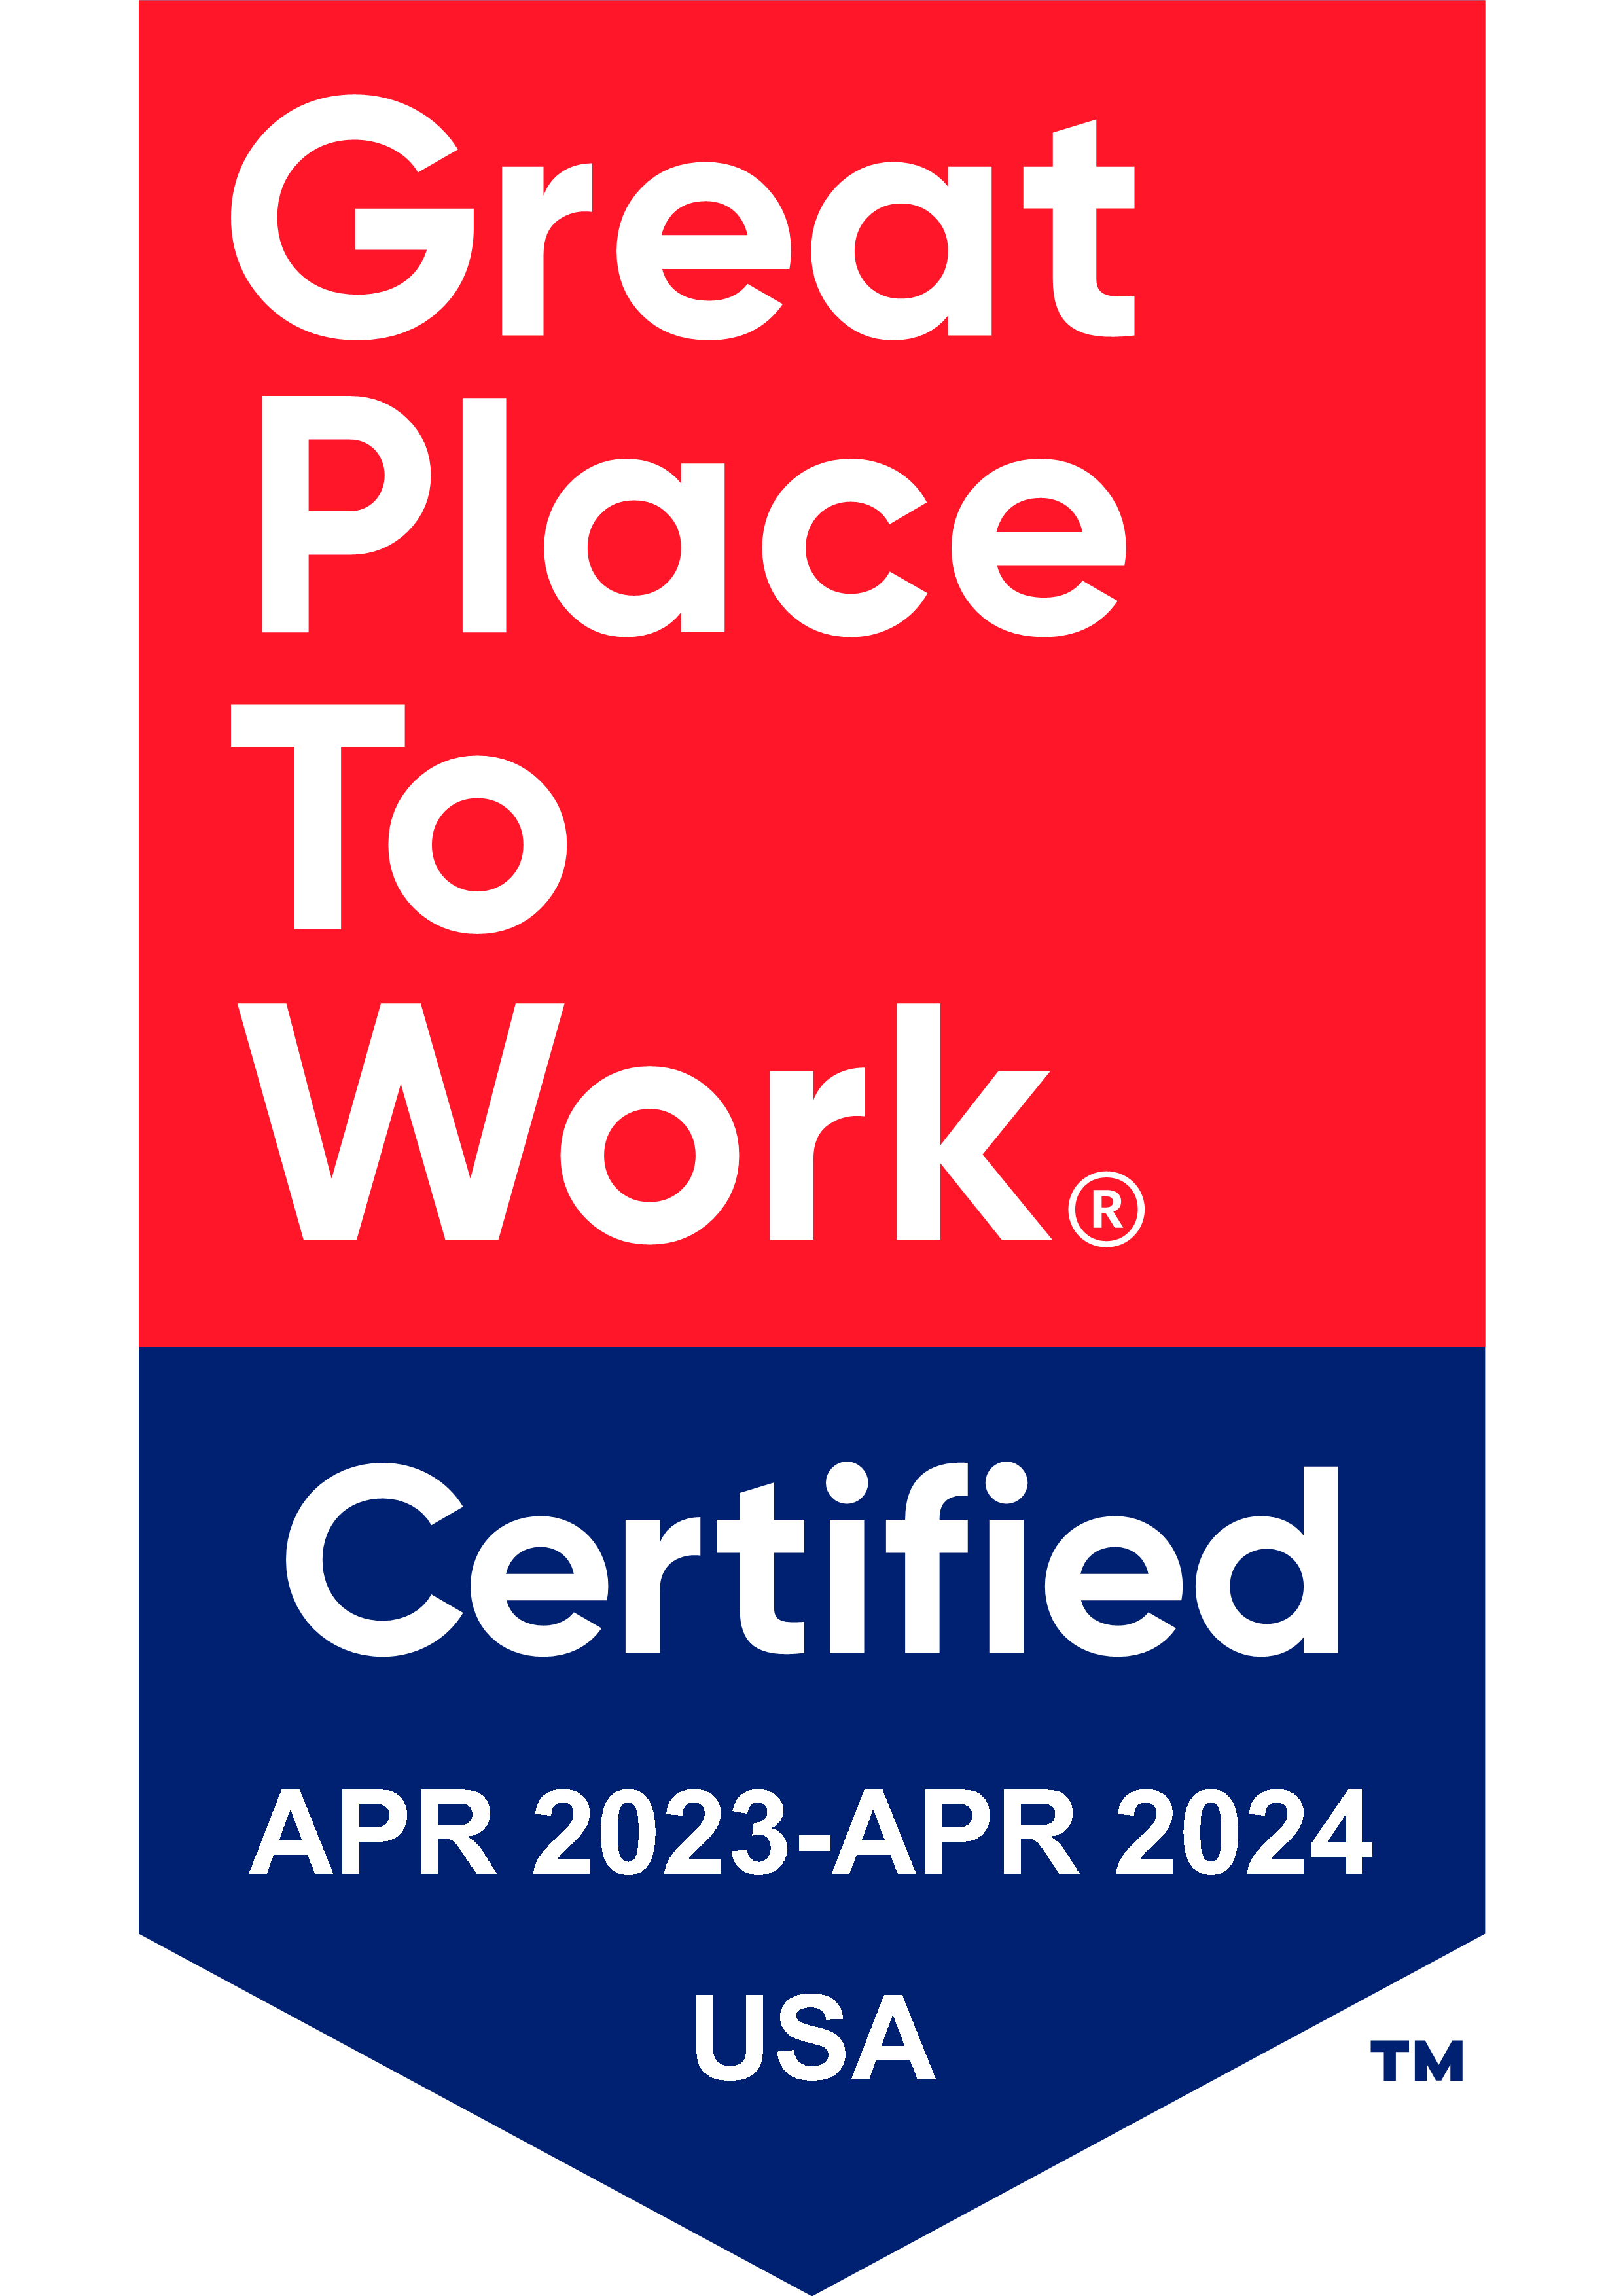 Great Place to Work Certified. April 2023 through April 2024